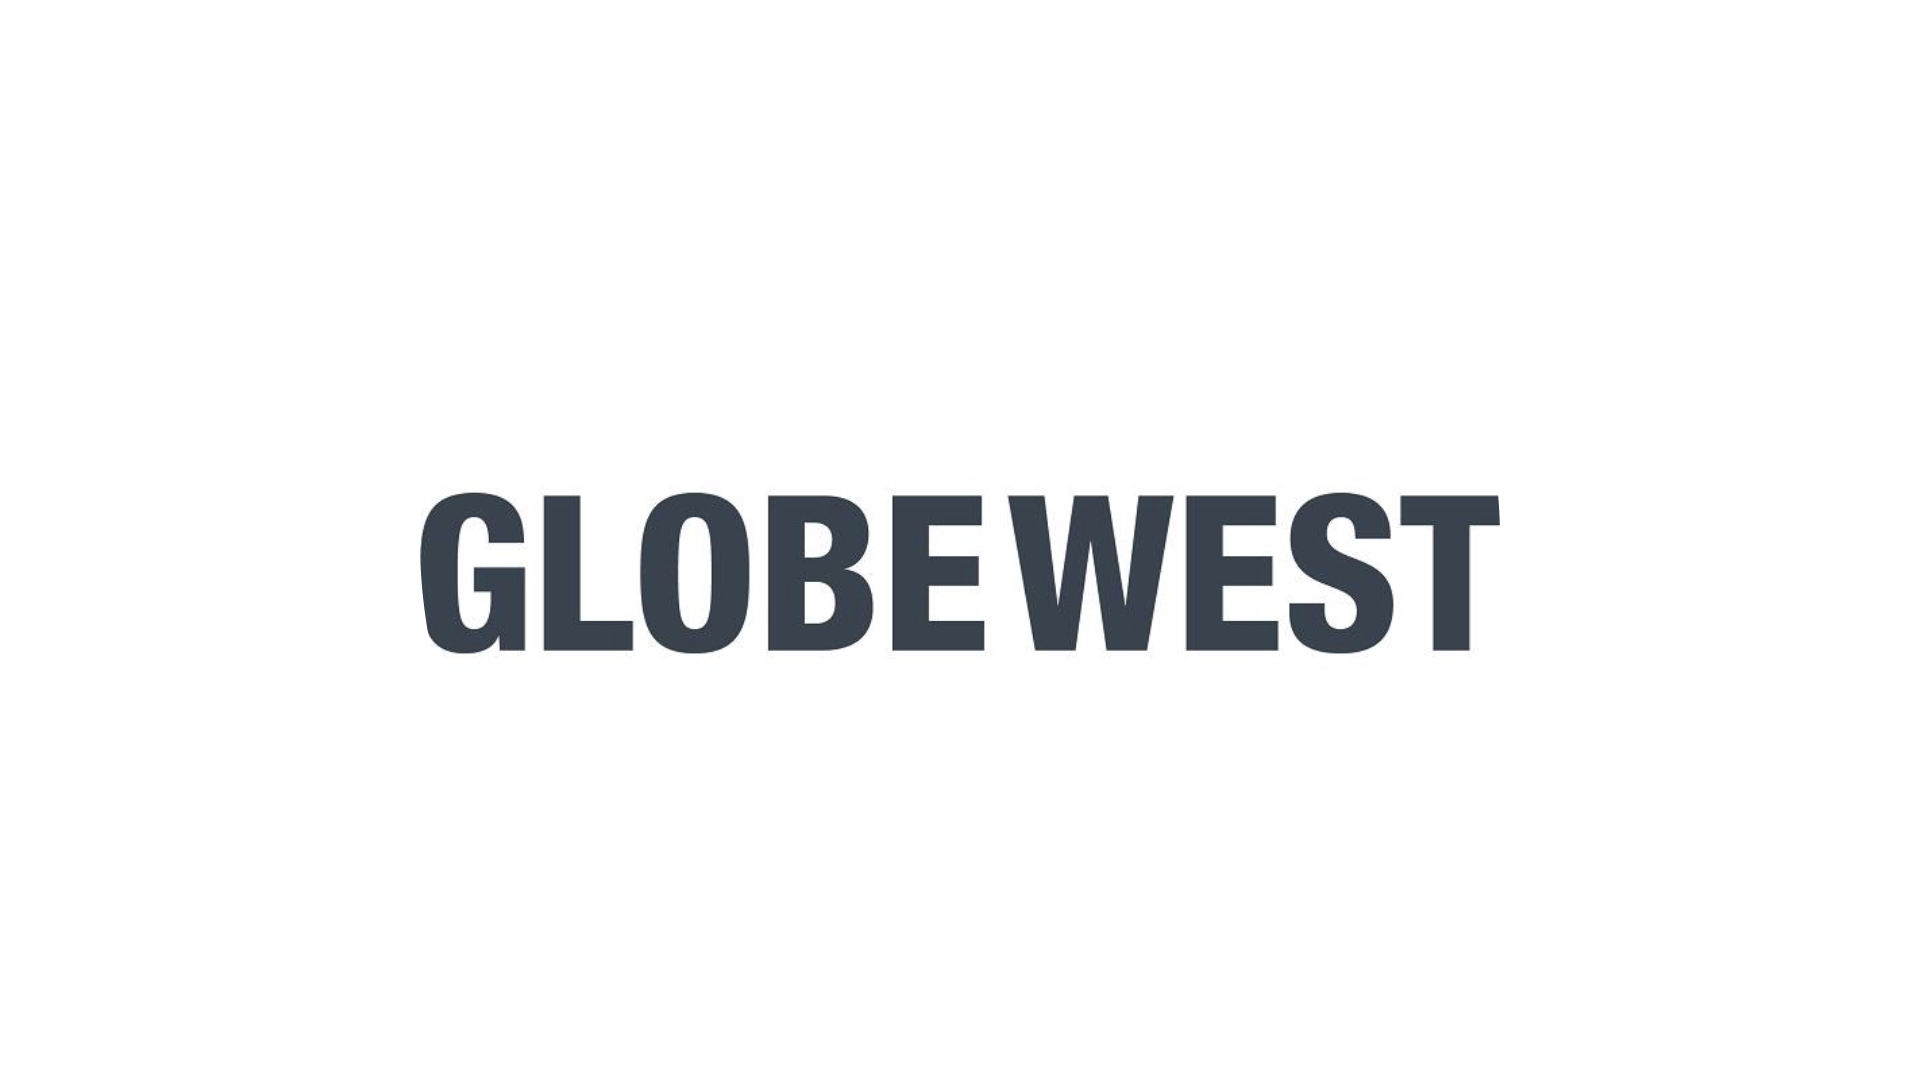 Get the Light Meets Dark style with Globewest